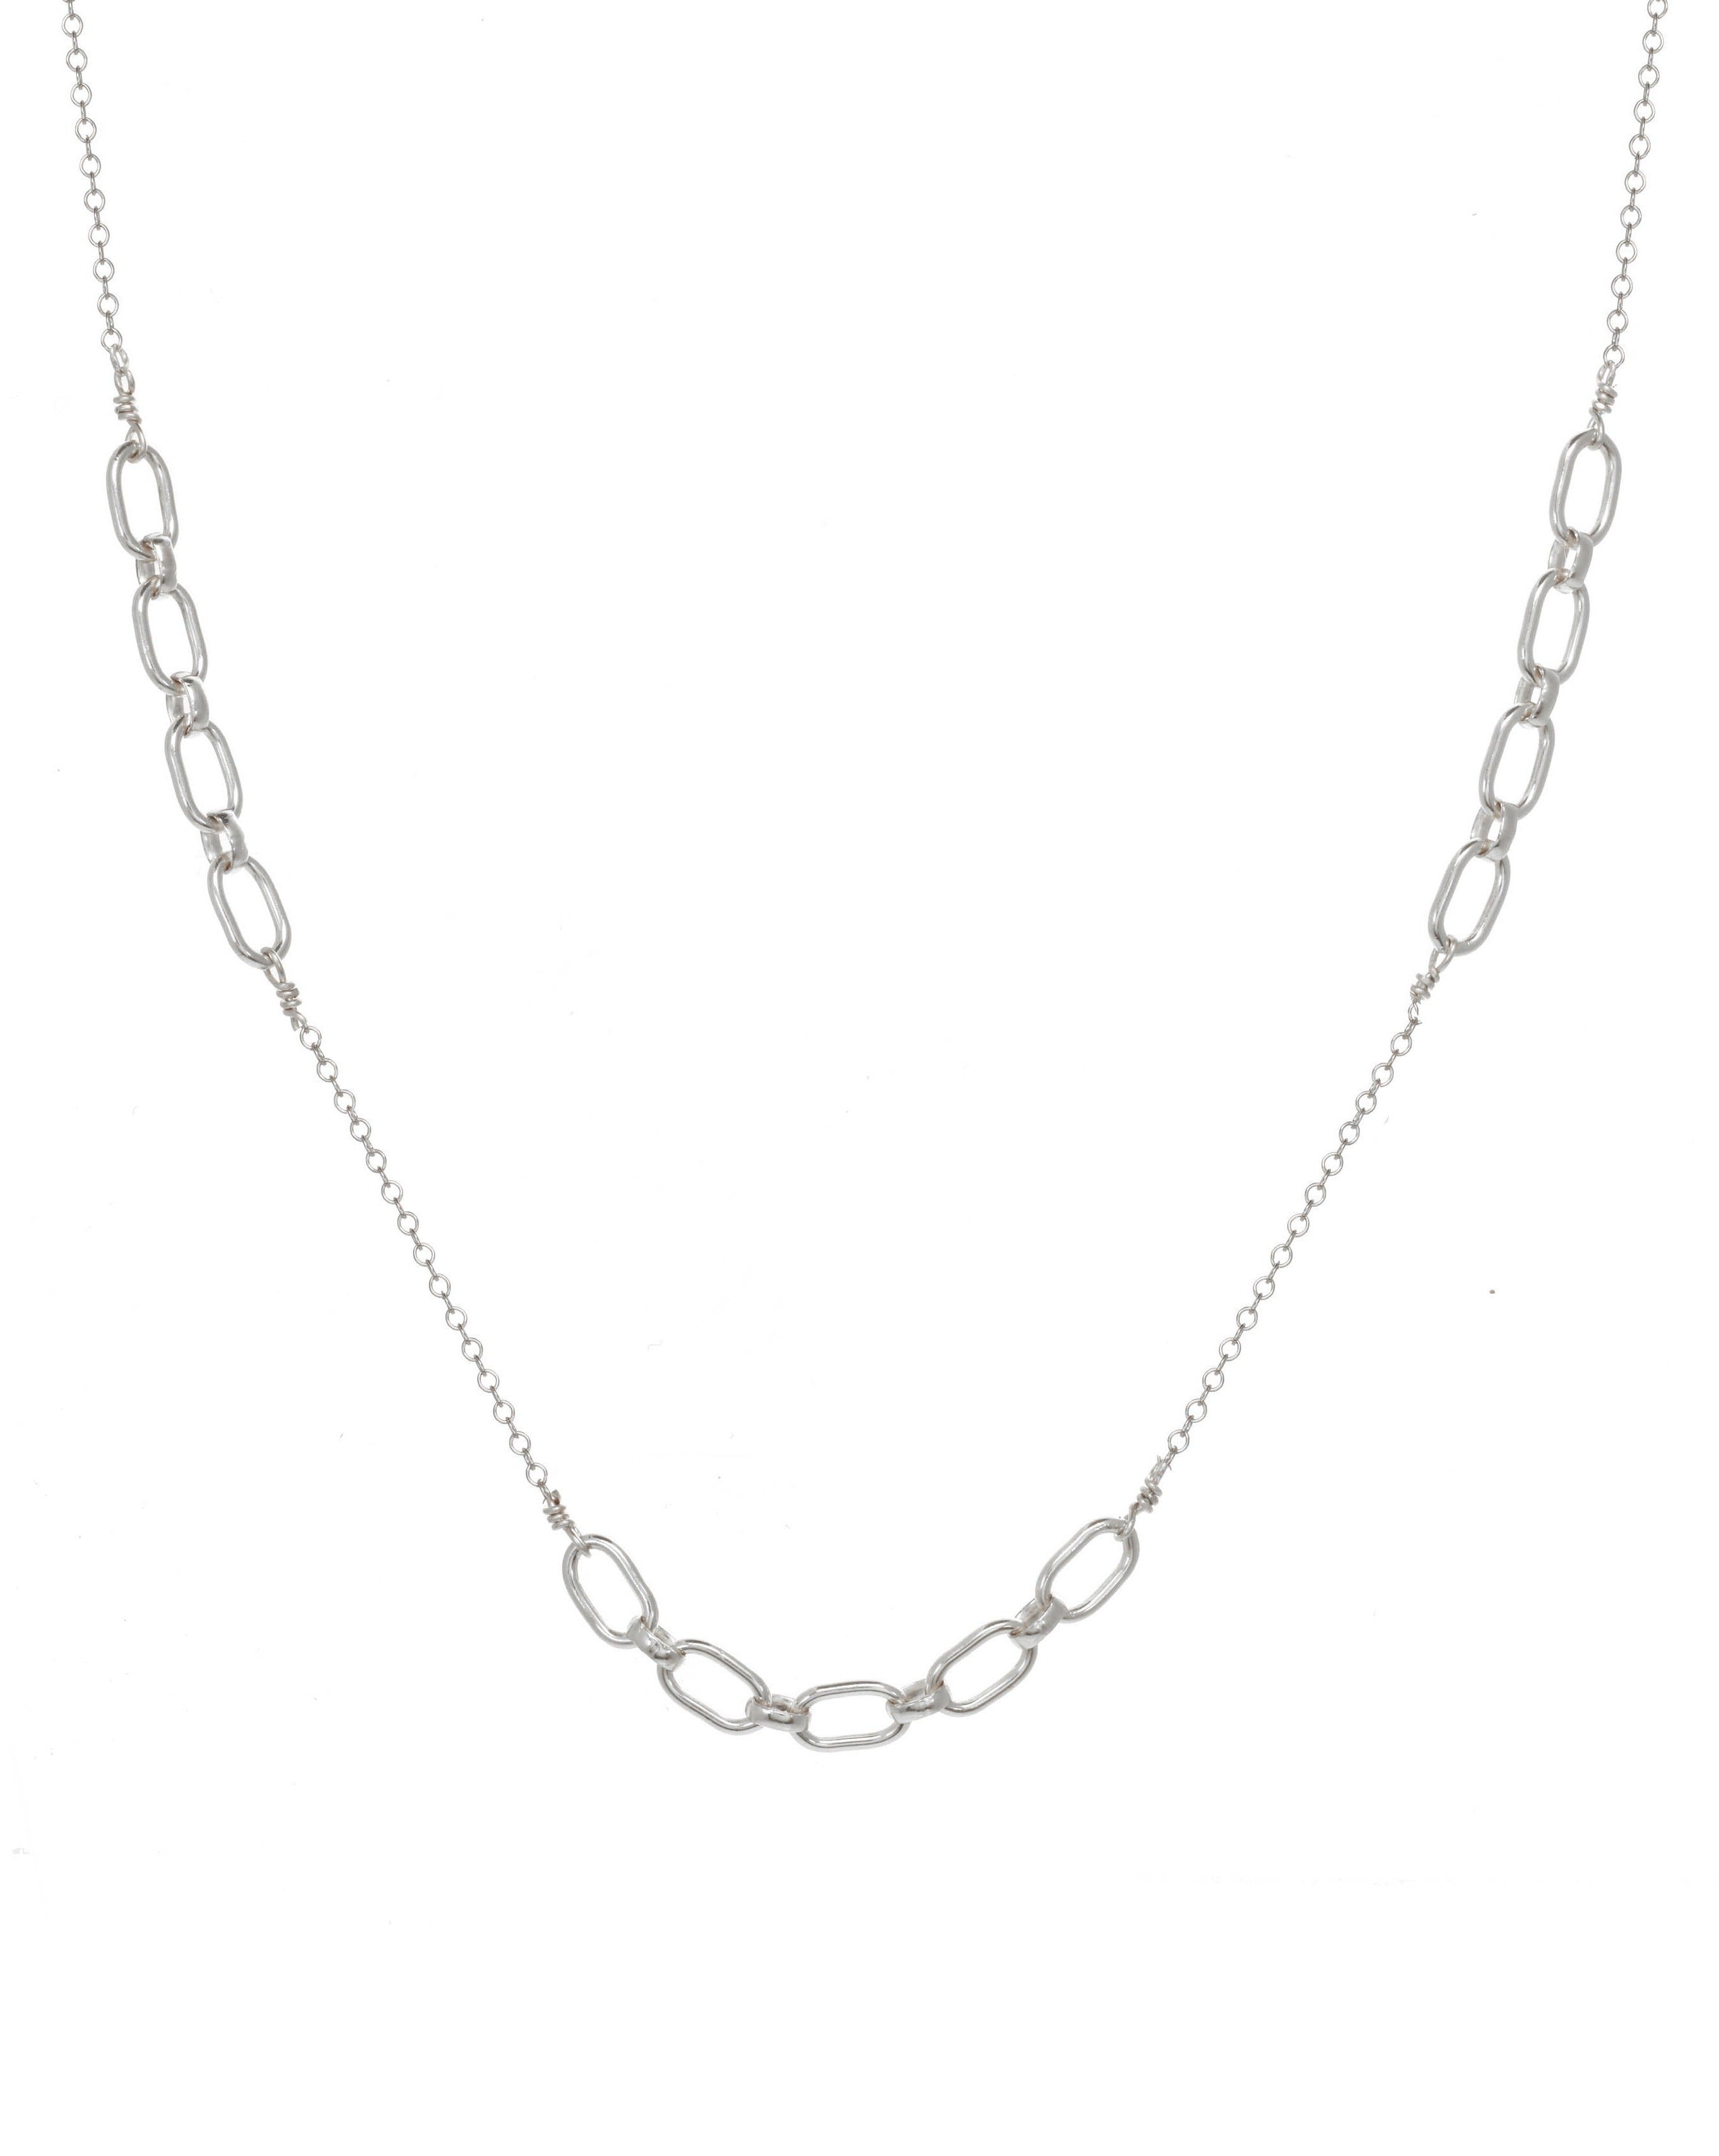 Yvonne Necklace by KOZAKH. A 14 to 16 inch adjustable length necklace, crafted in Sterling Silver, featuring flat link chain design.